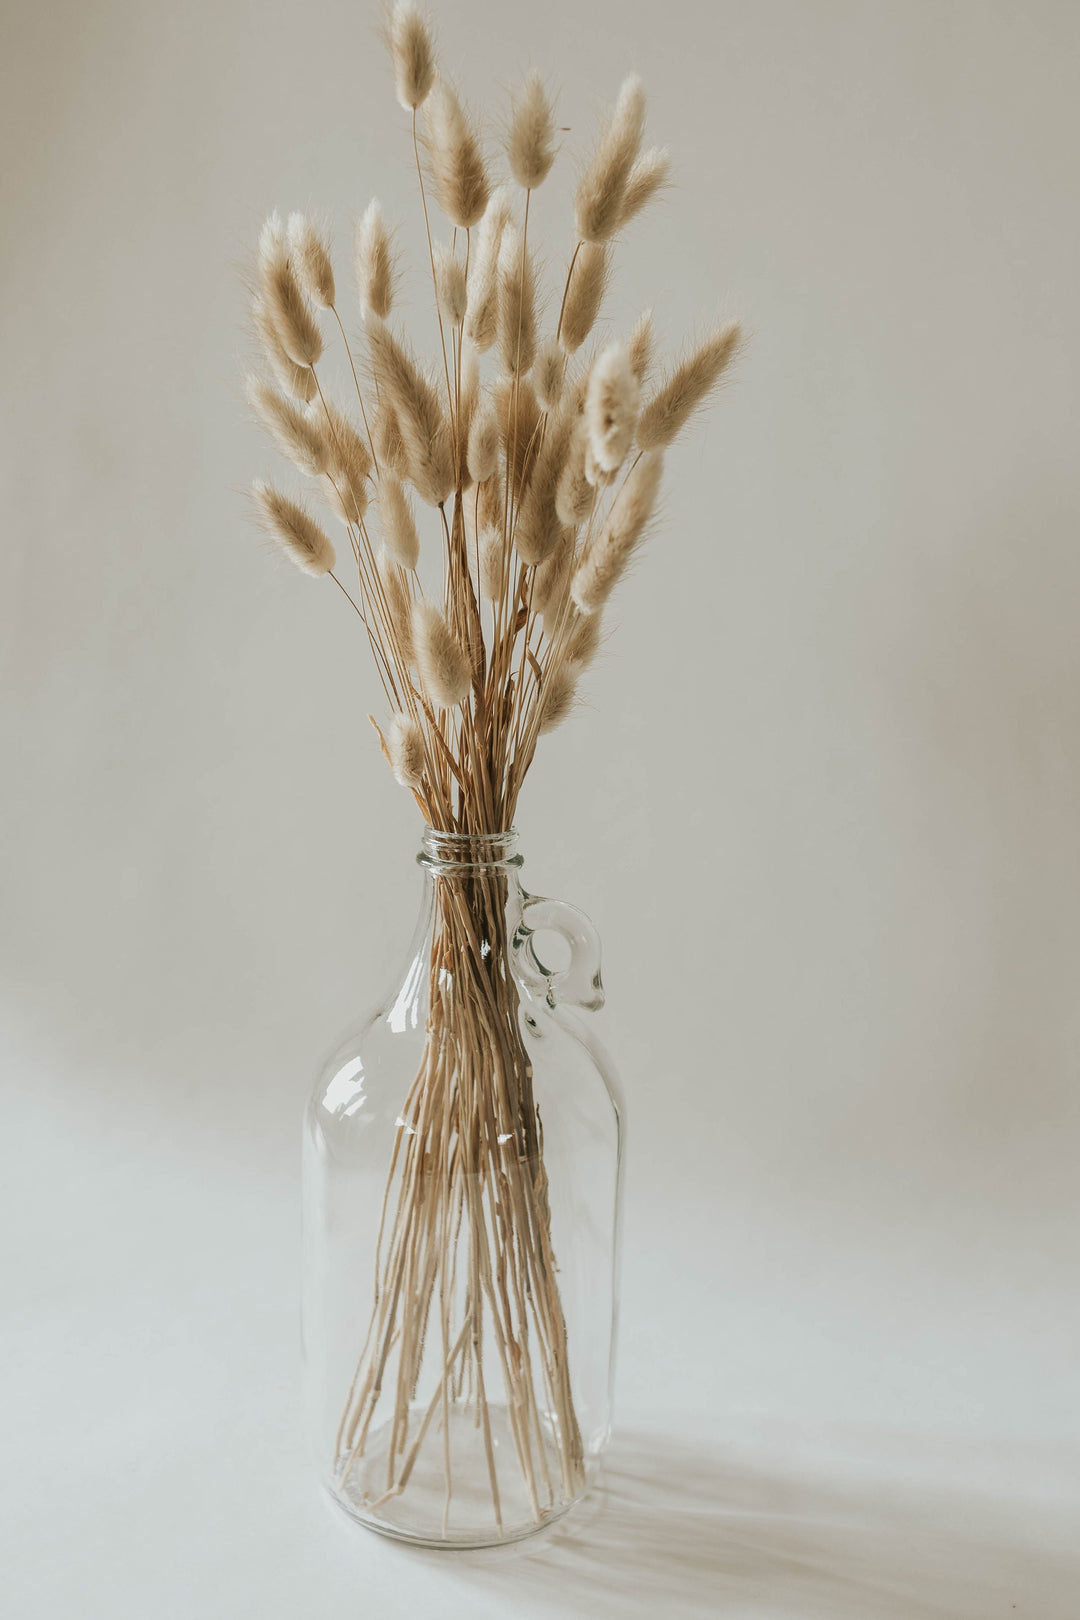 Natural bunny tails in clear jug vase for By Two Fields